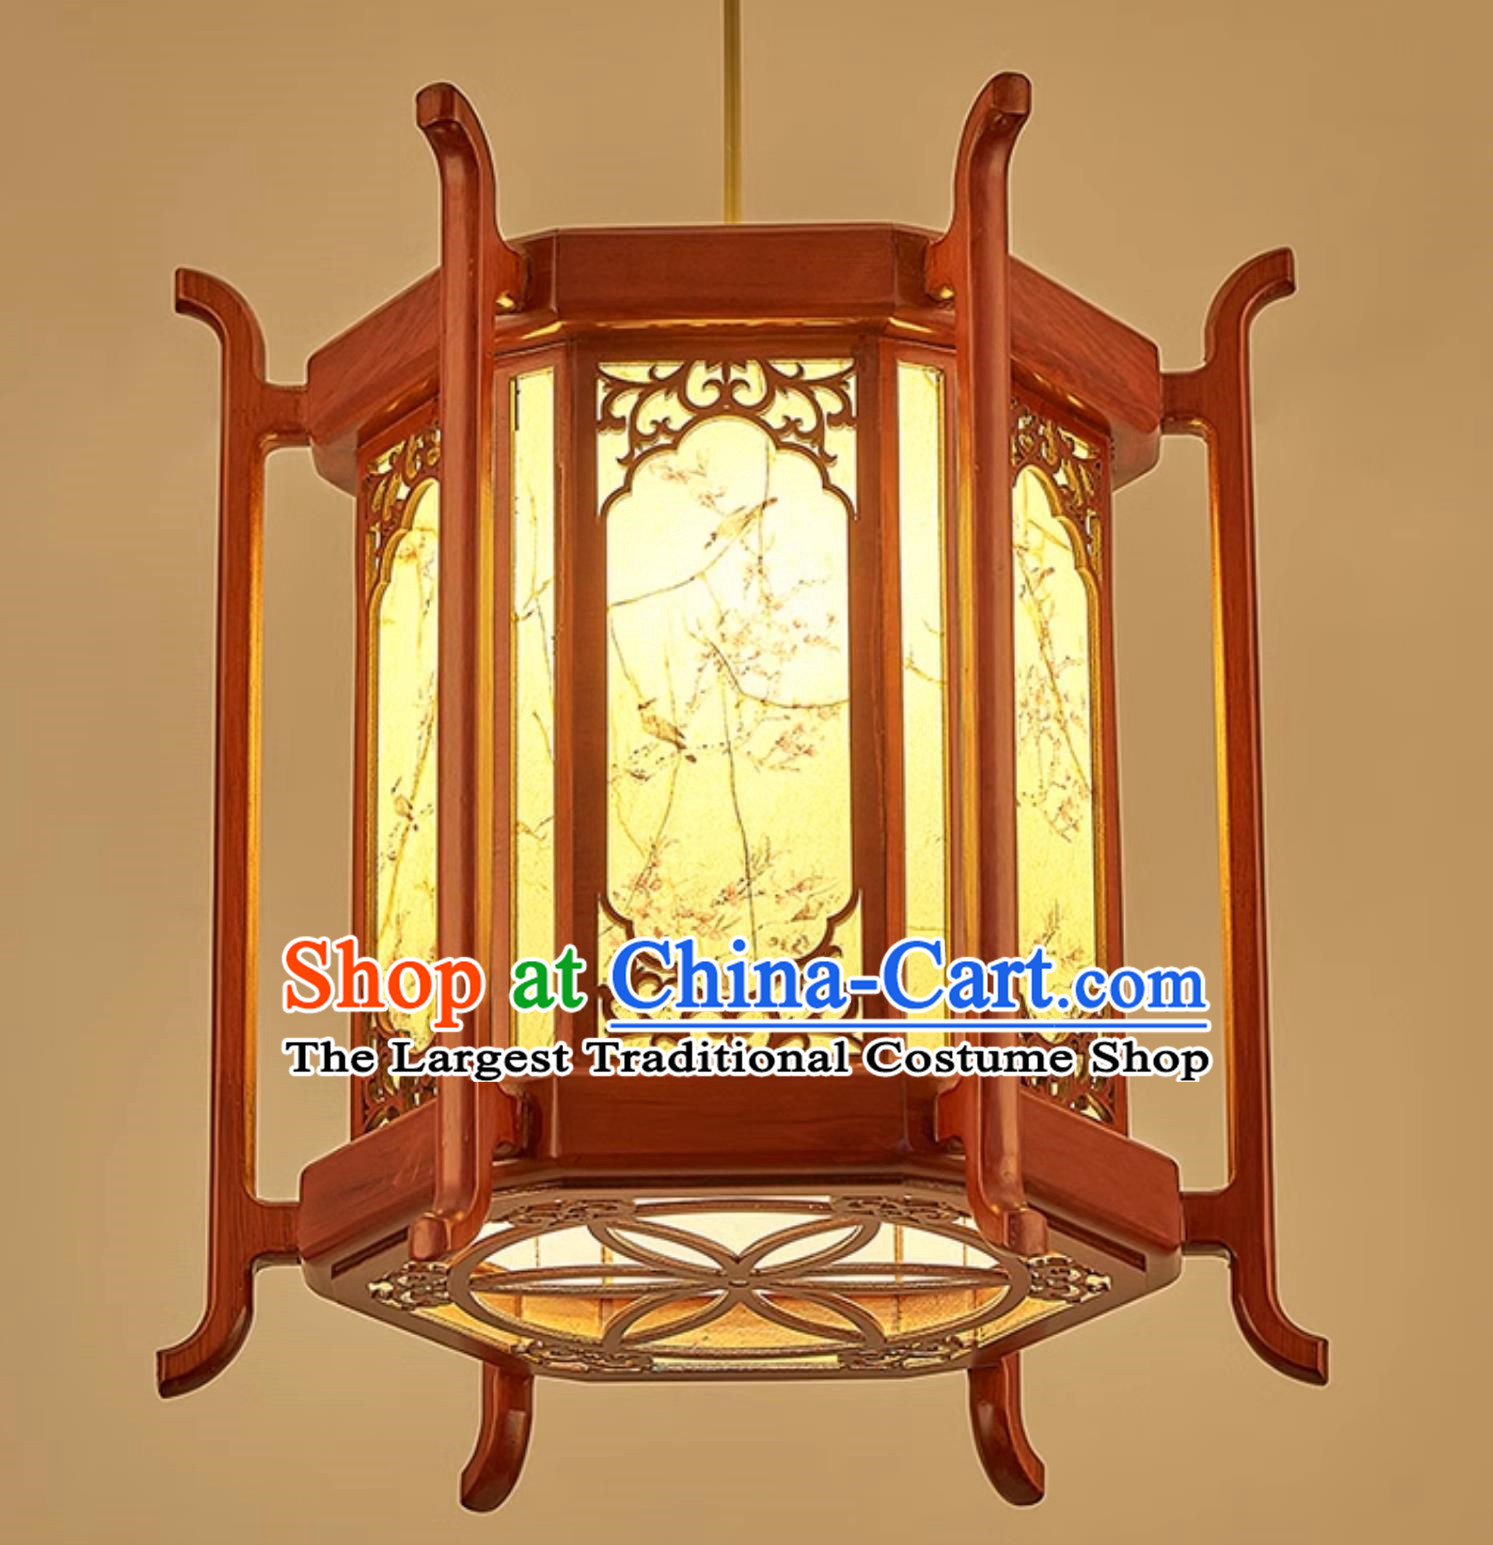 24 Inches Diameter Chinese Antique Chandelier Classical Lantern Solid Wood Lamp